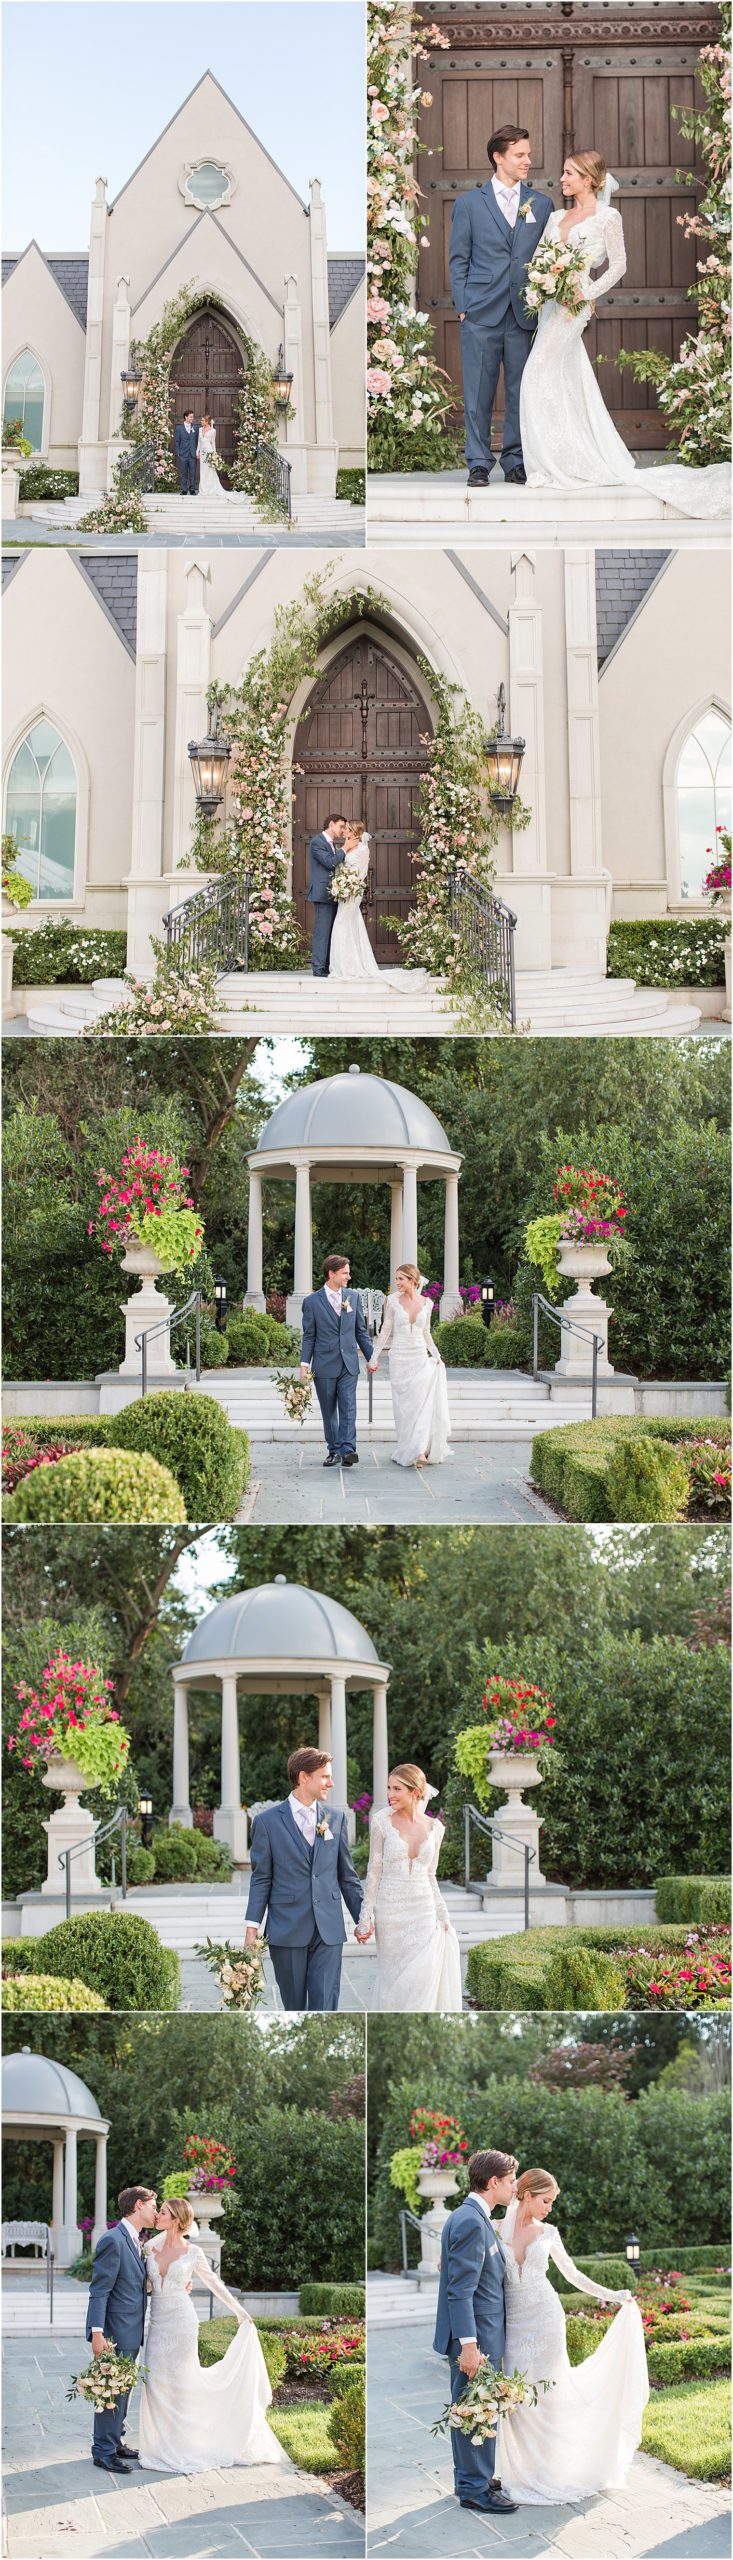 Bride + Groom at Park Chateau during outside wedding